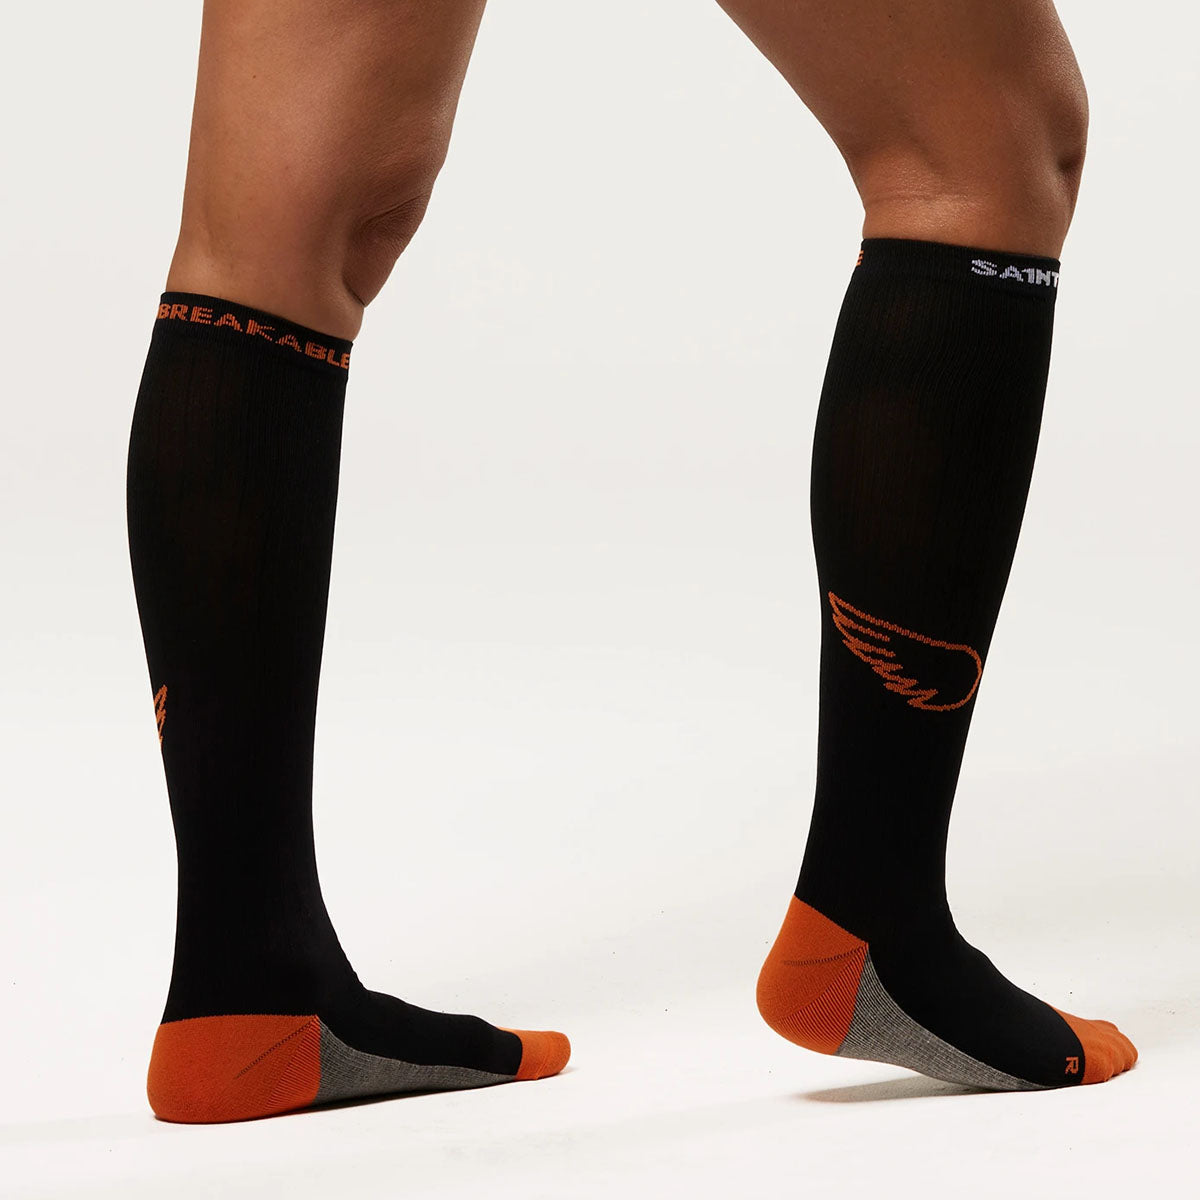 Does wearing compression stockings help in minimising varicose